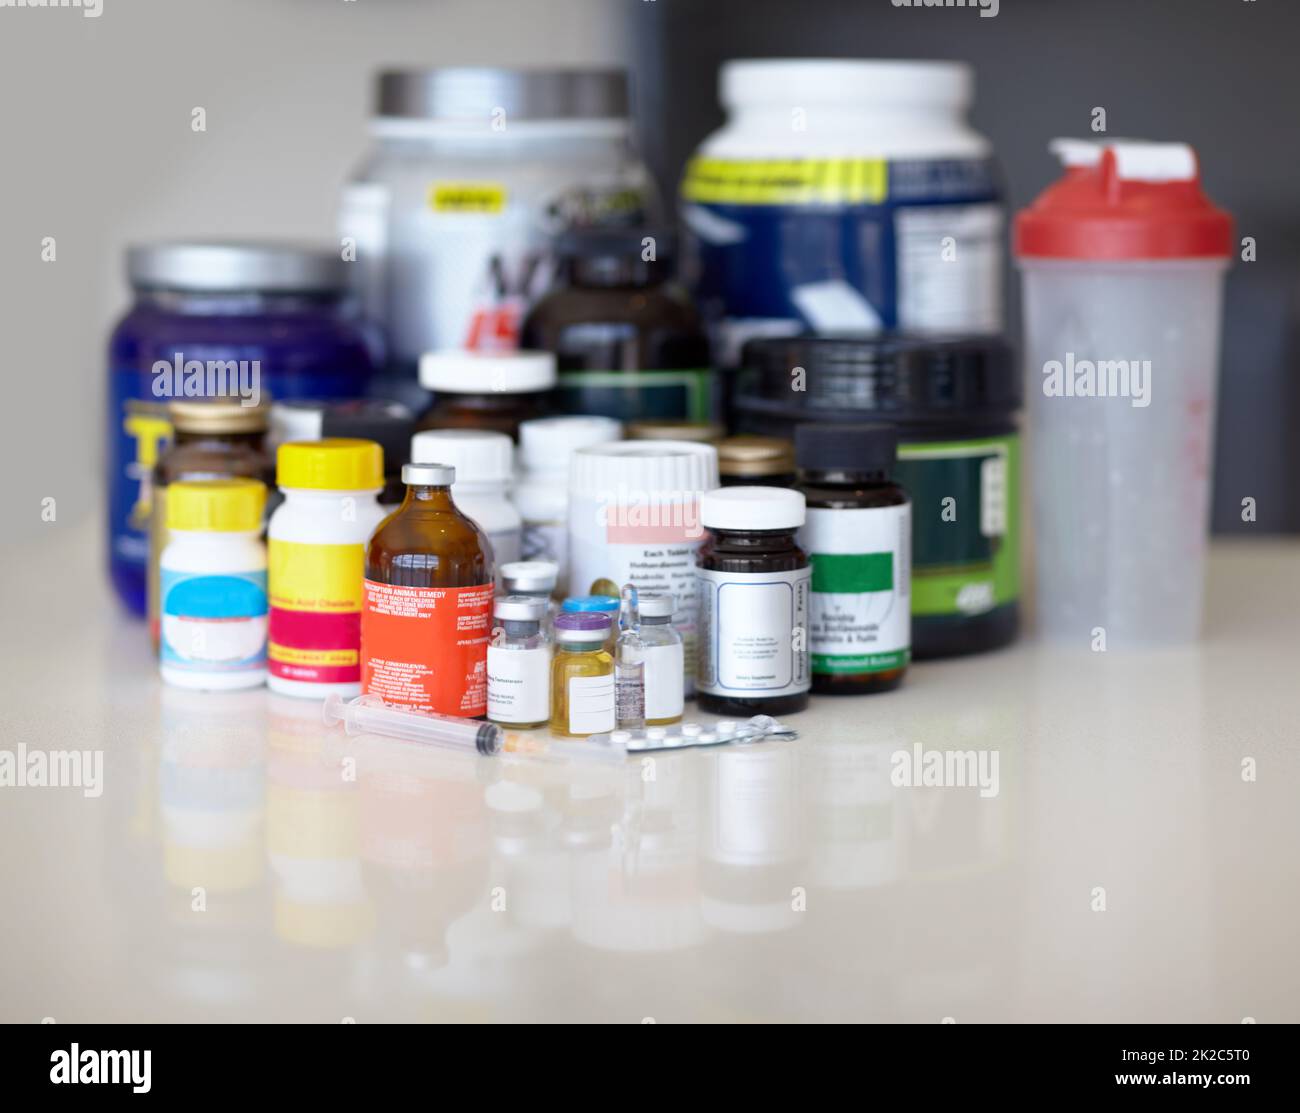 Feeding the addiction. Medicine bottles and pills with protein shakes and meal replacements. Stock Photo